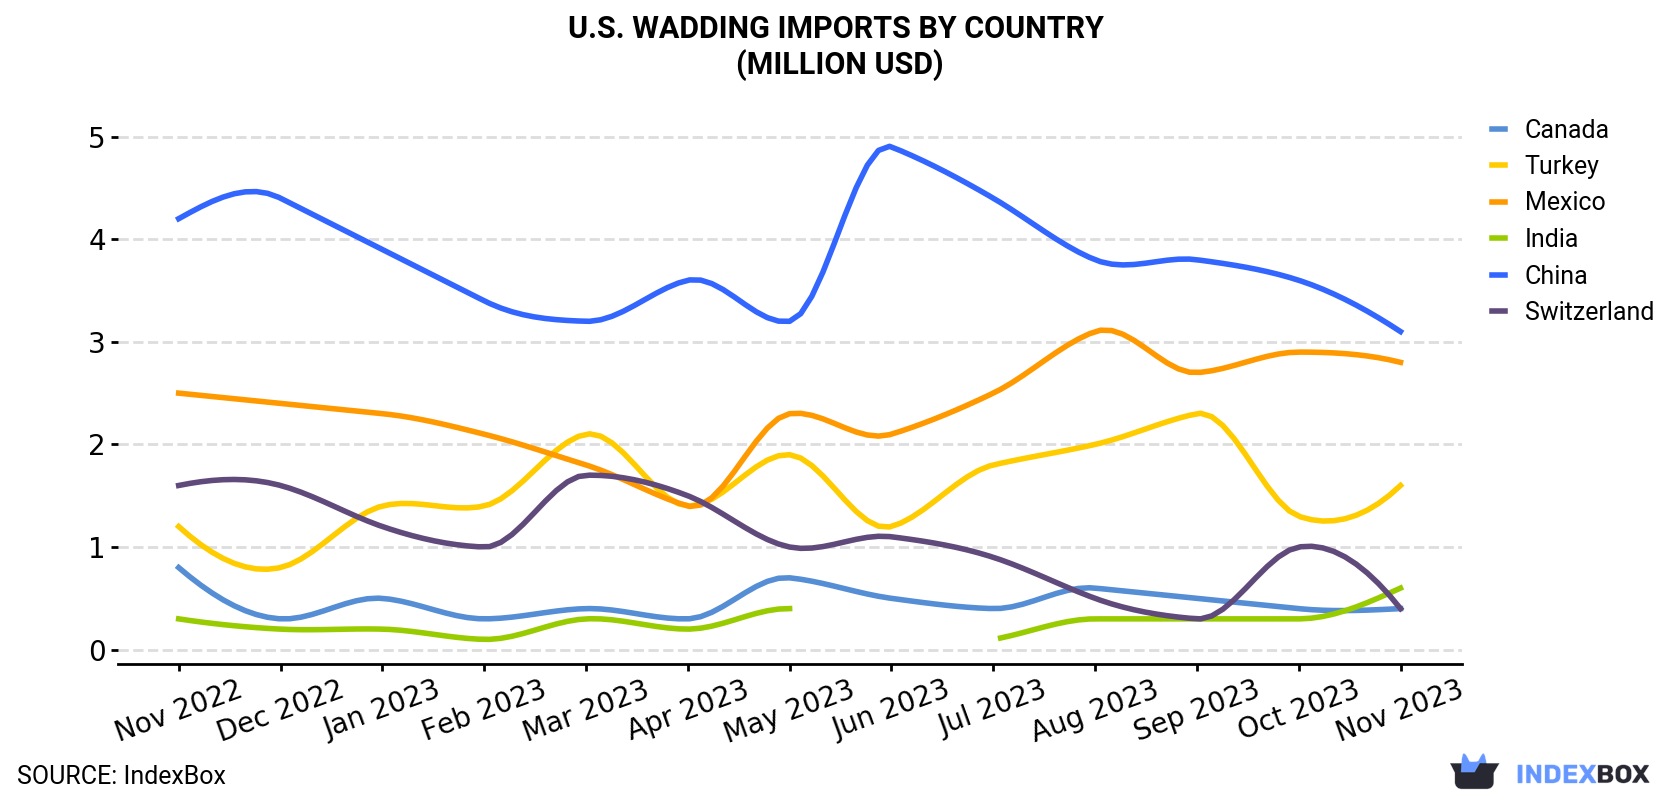 U.S. Wadding Imports By Country (Million USD)